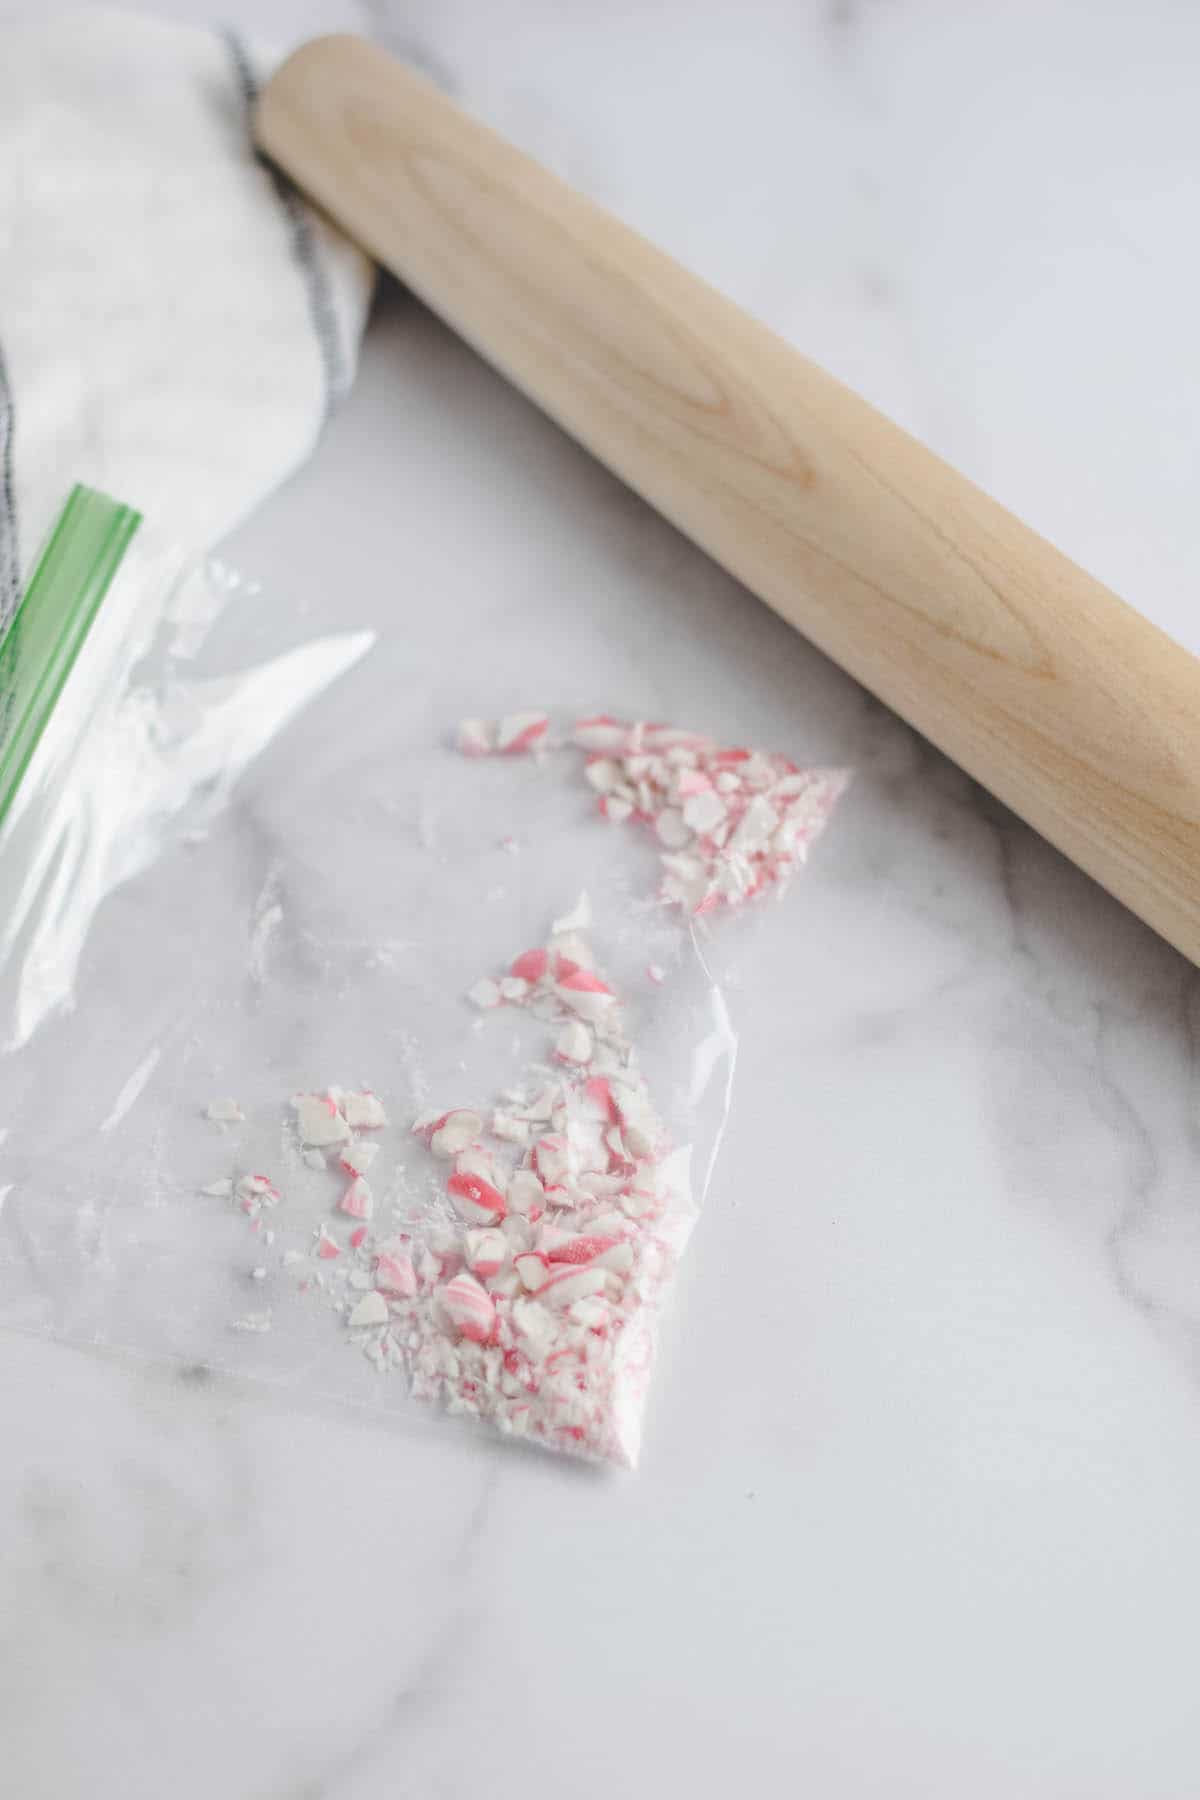 peppermint candy cane pieces crushed in a ziplock bag